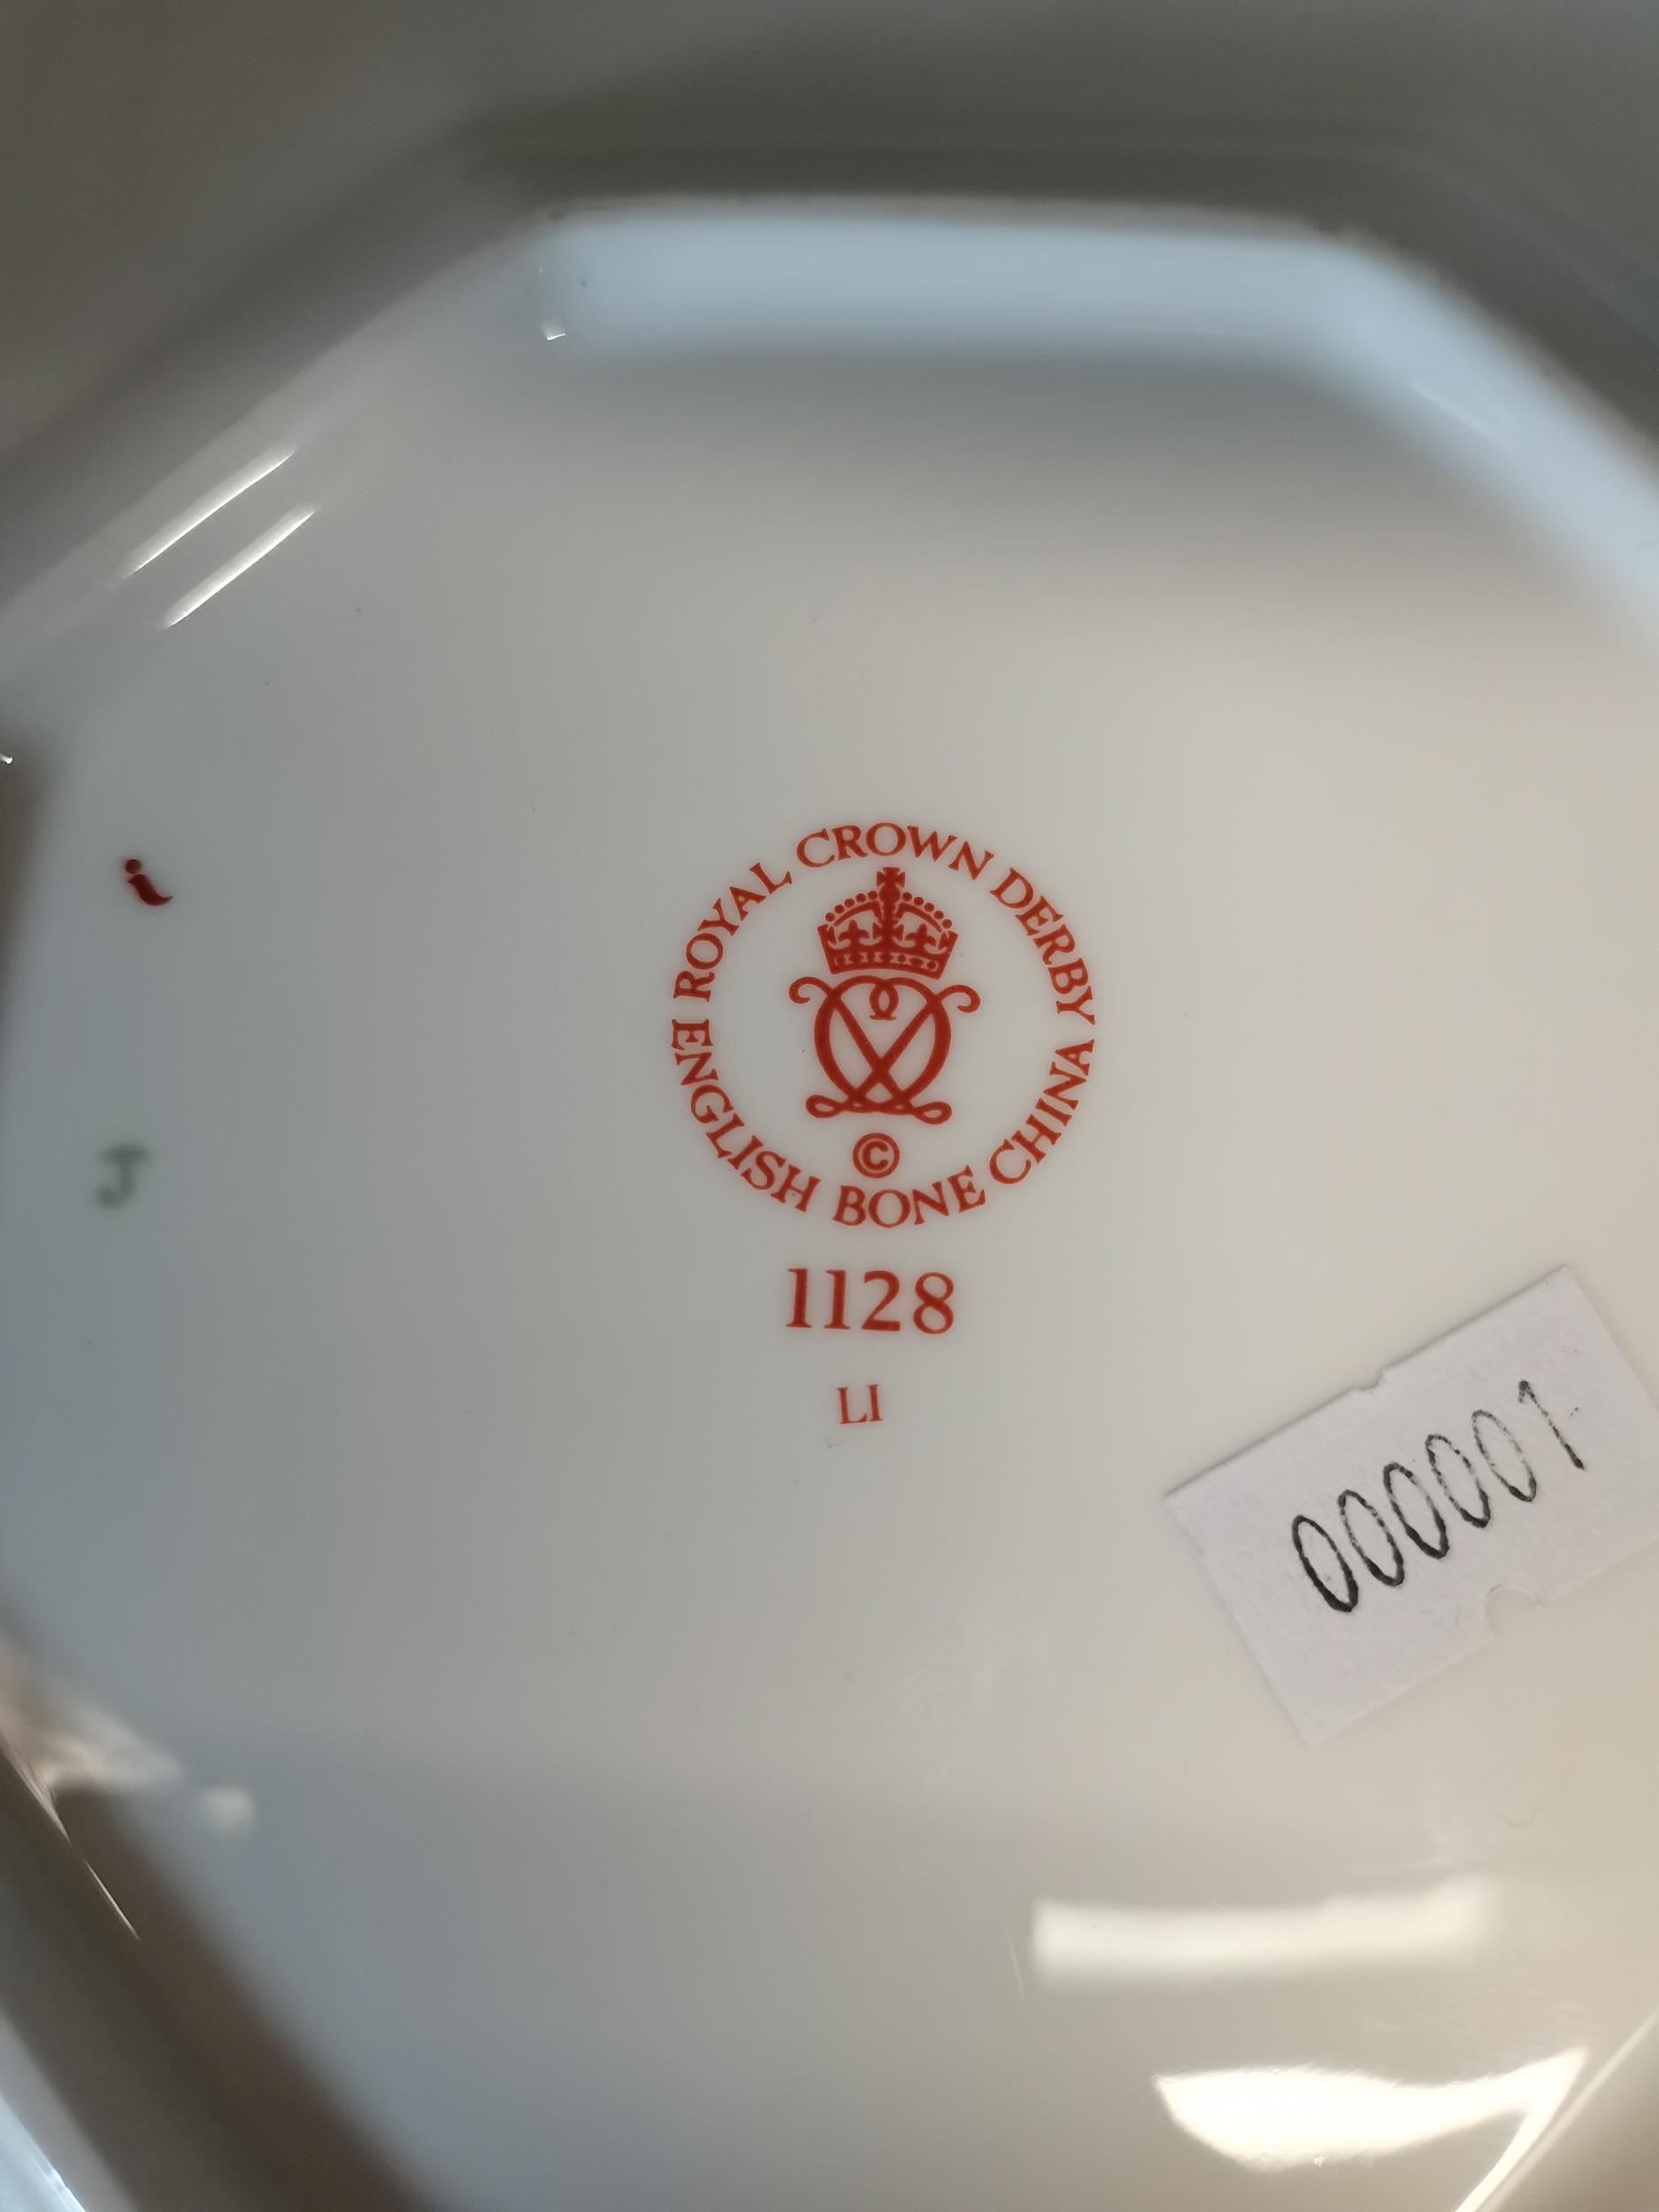 Octagonal Crown Derby Plate - 1128 - Image 2 of 2